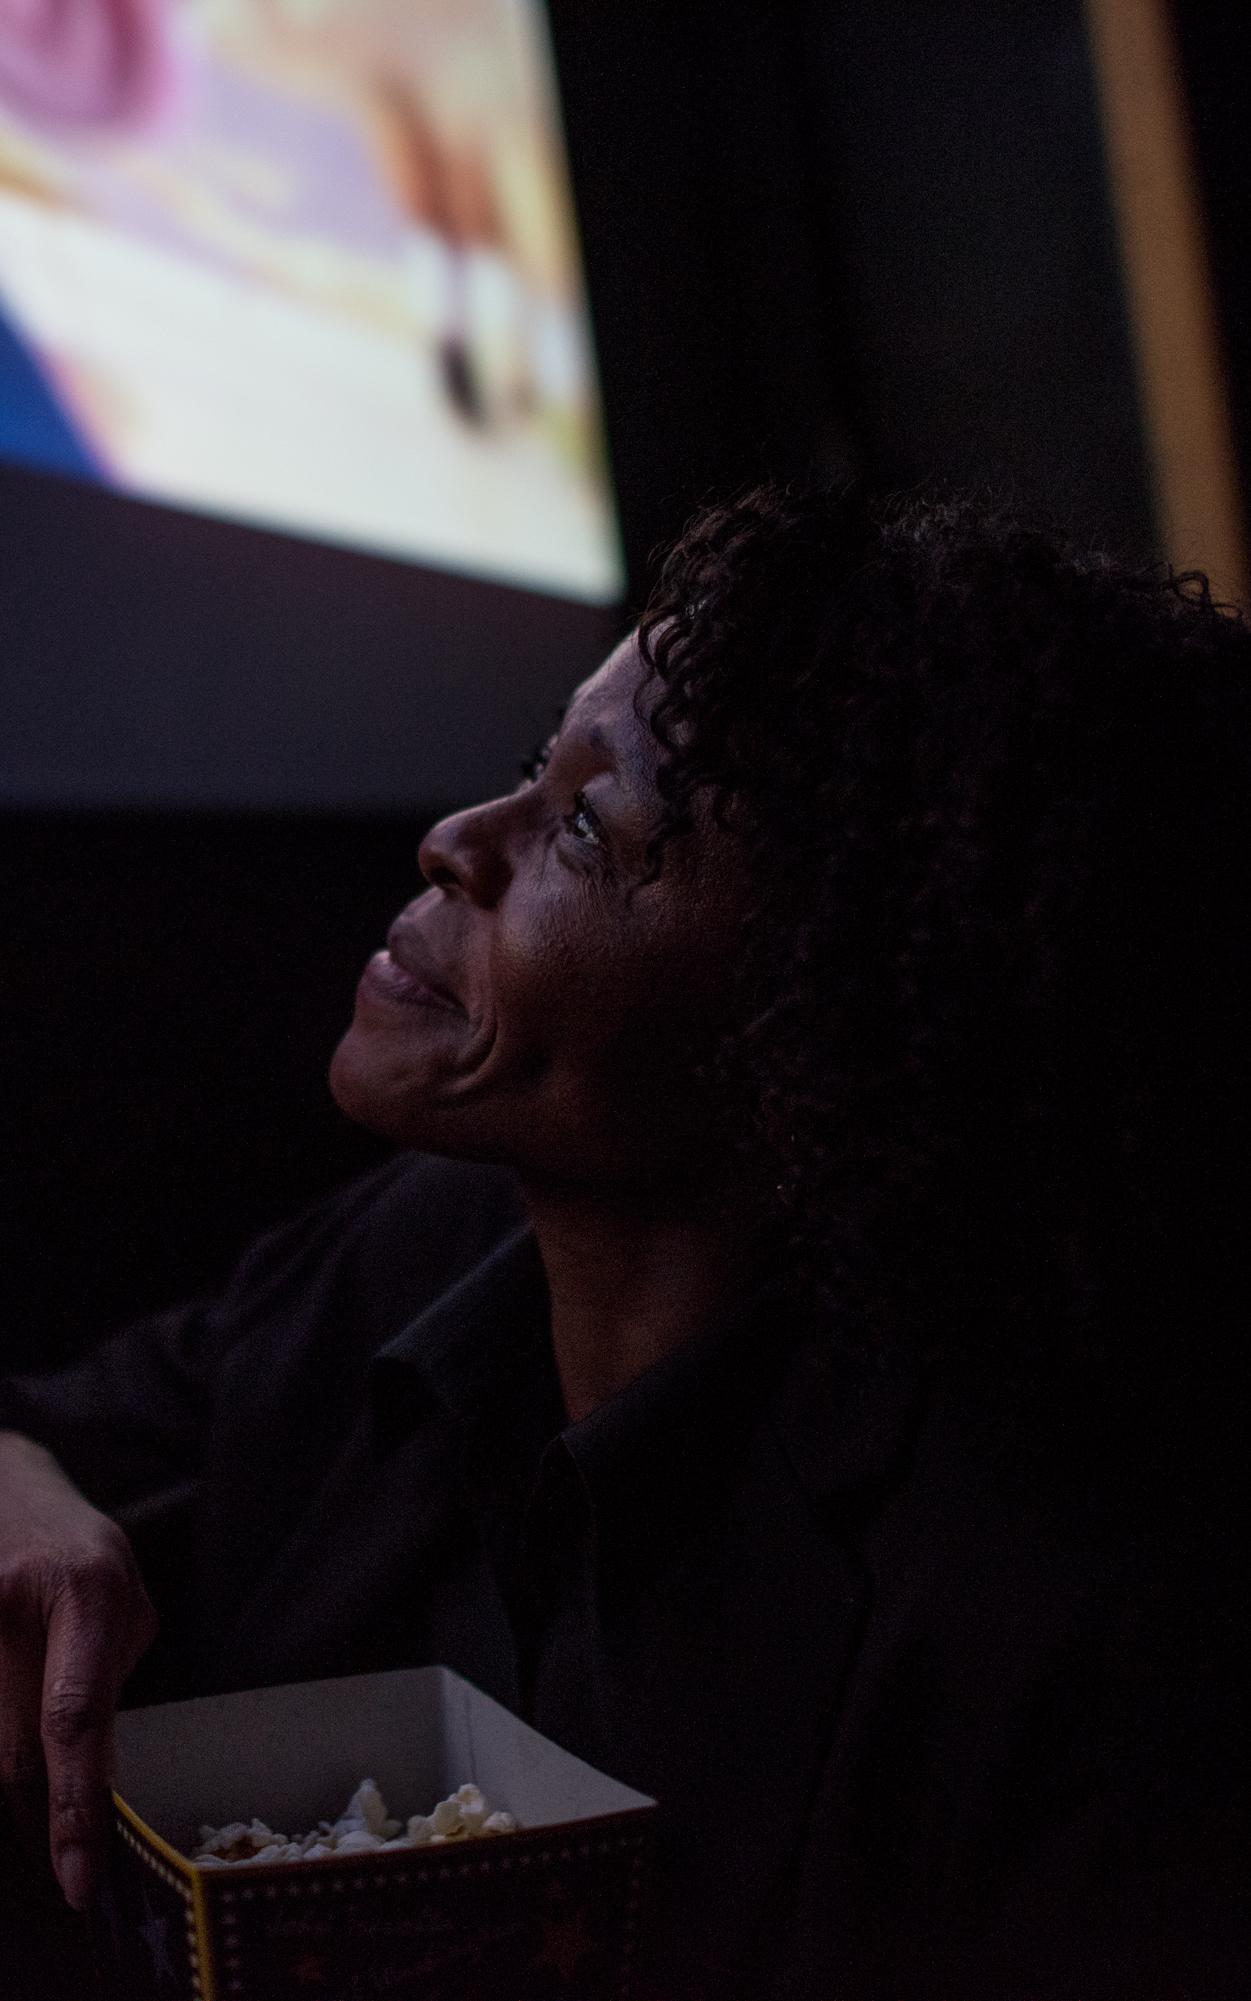 Woman smiling while looking up at a cinema screen